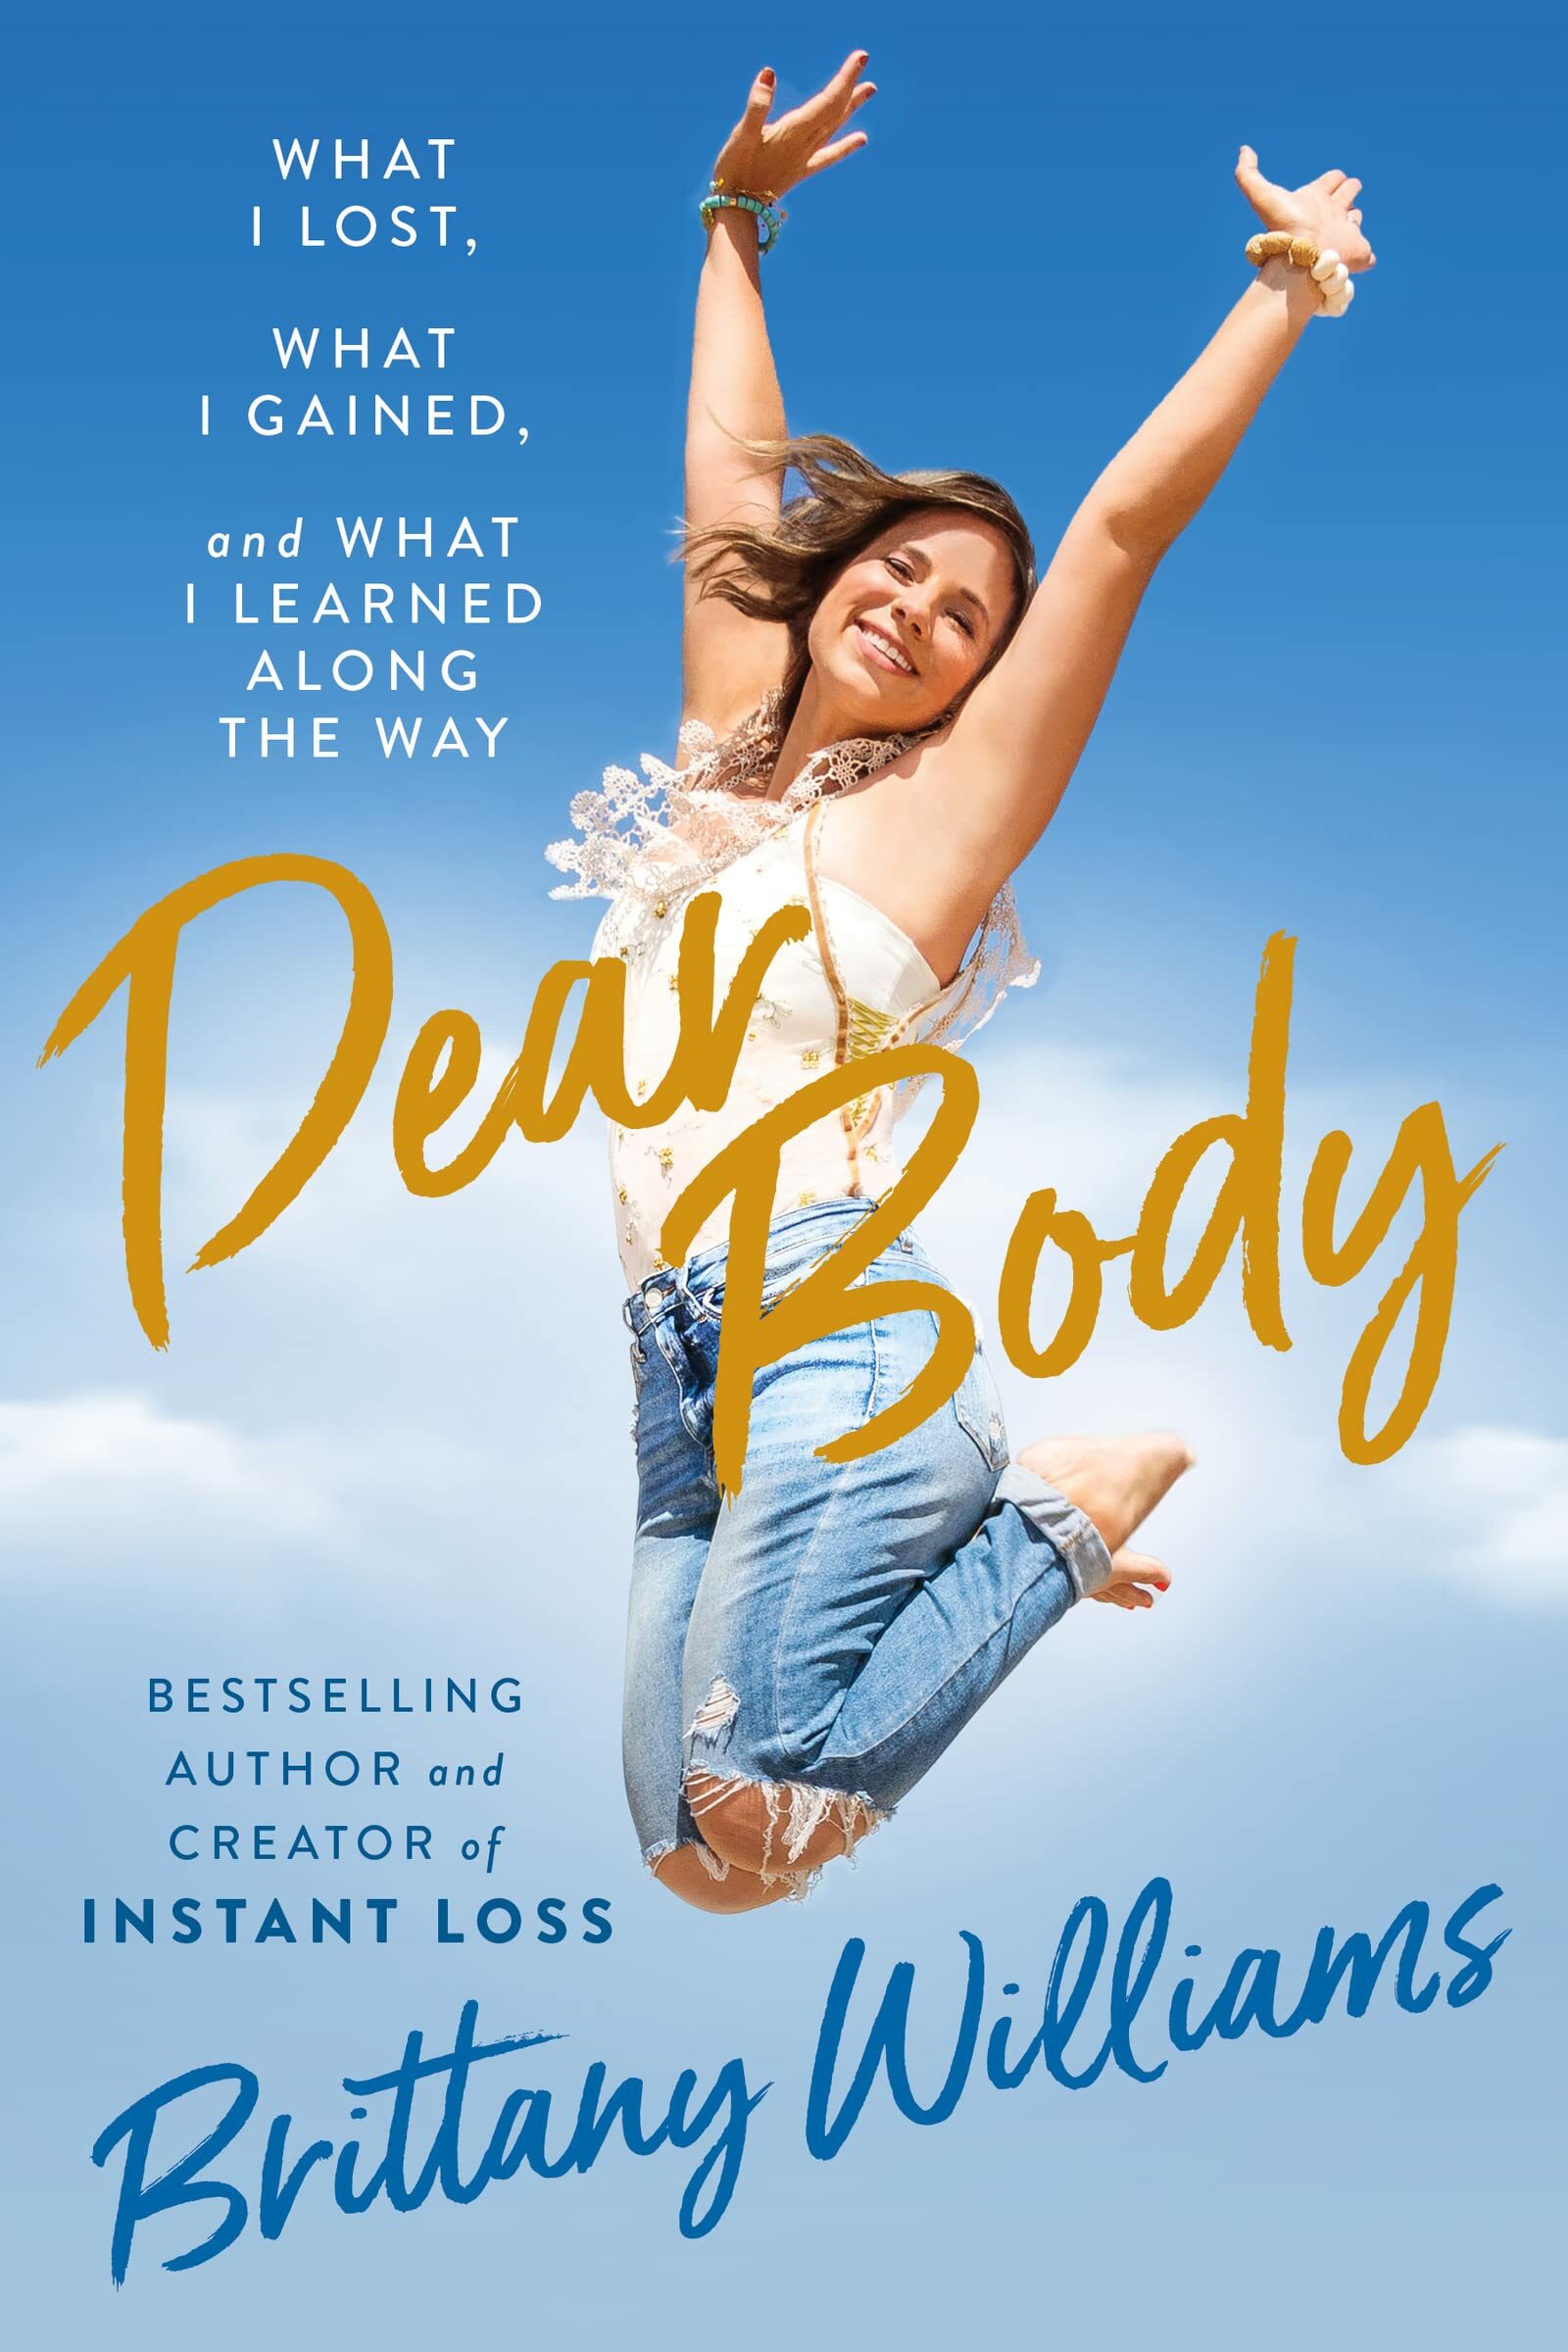 Dear Body: What I Lost, What I Gained, and Who I’ve Become